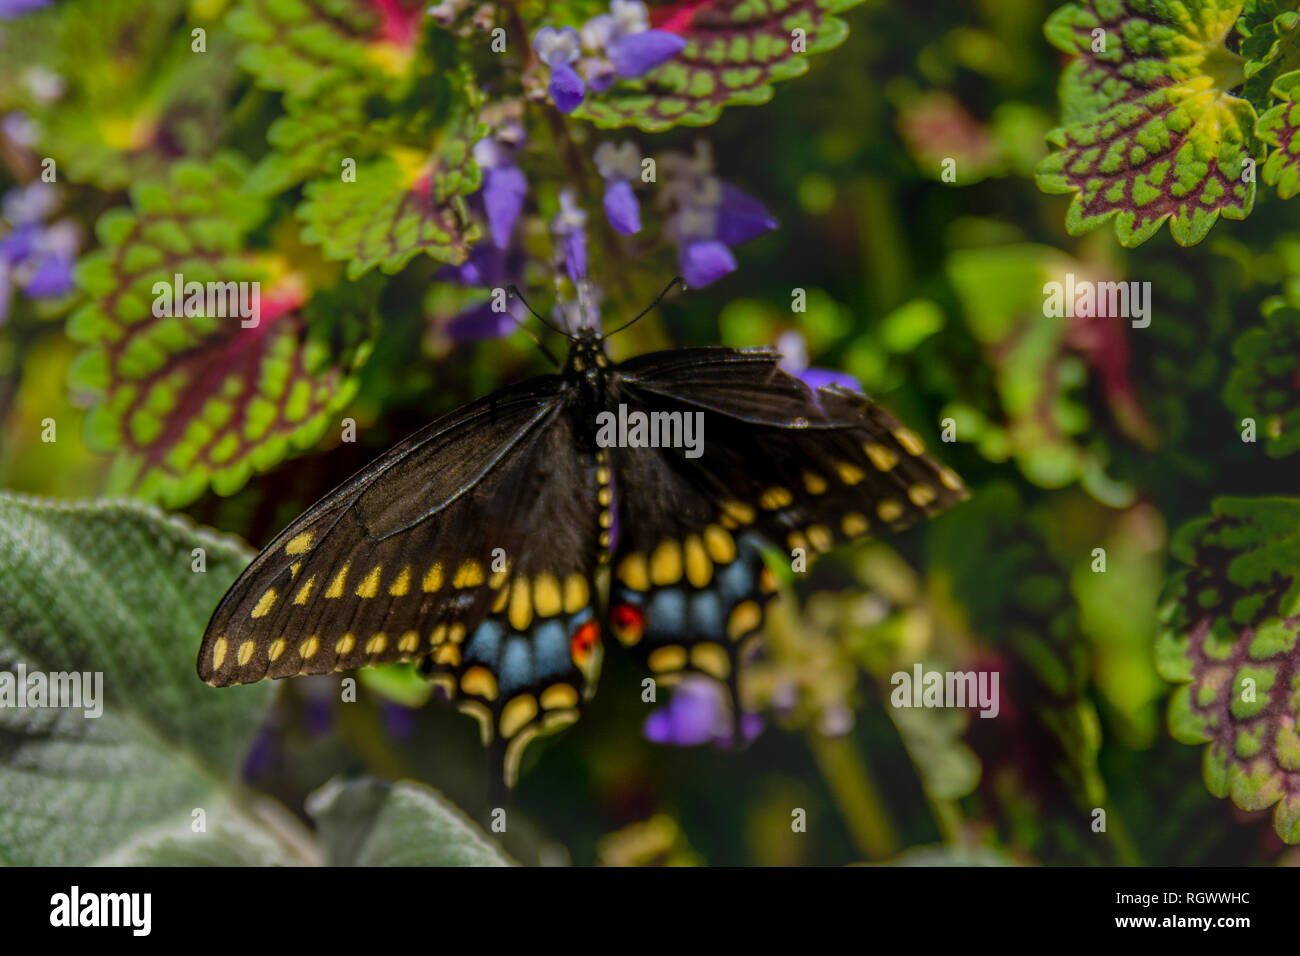 Macro photograph of a black swallowtail butterfly Stock Photo